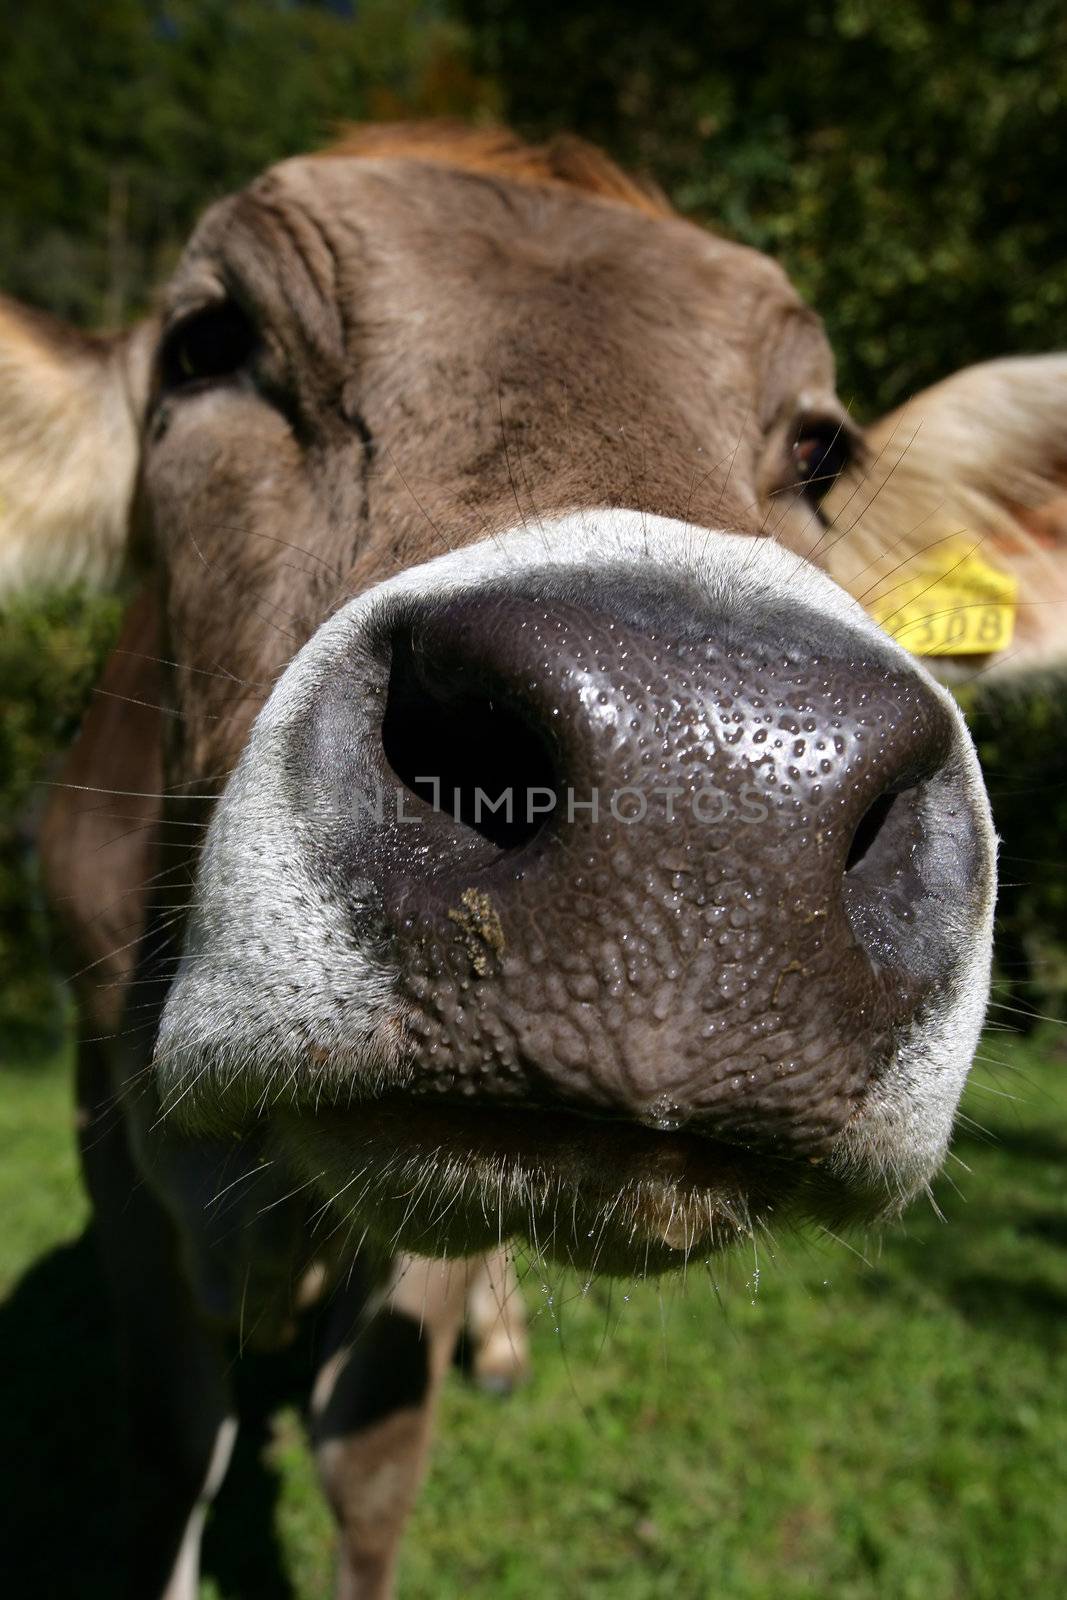 The curious snout of a Swiss cow.
